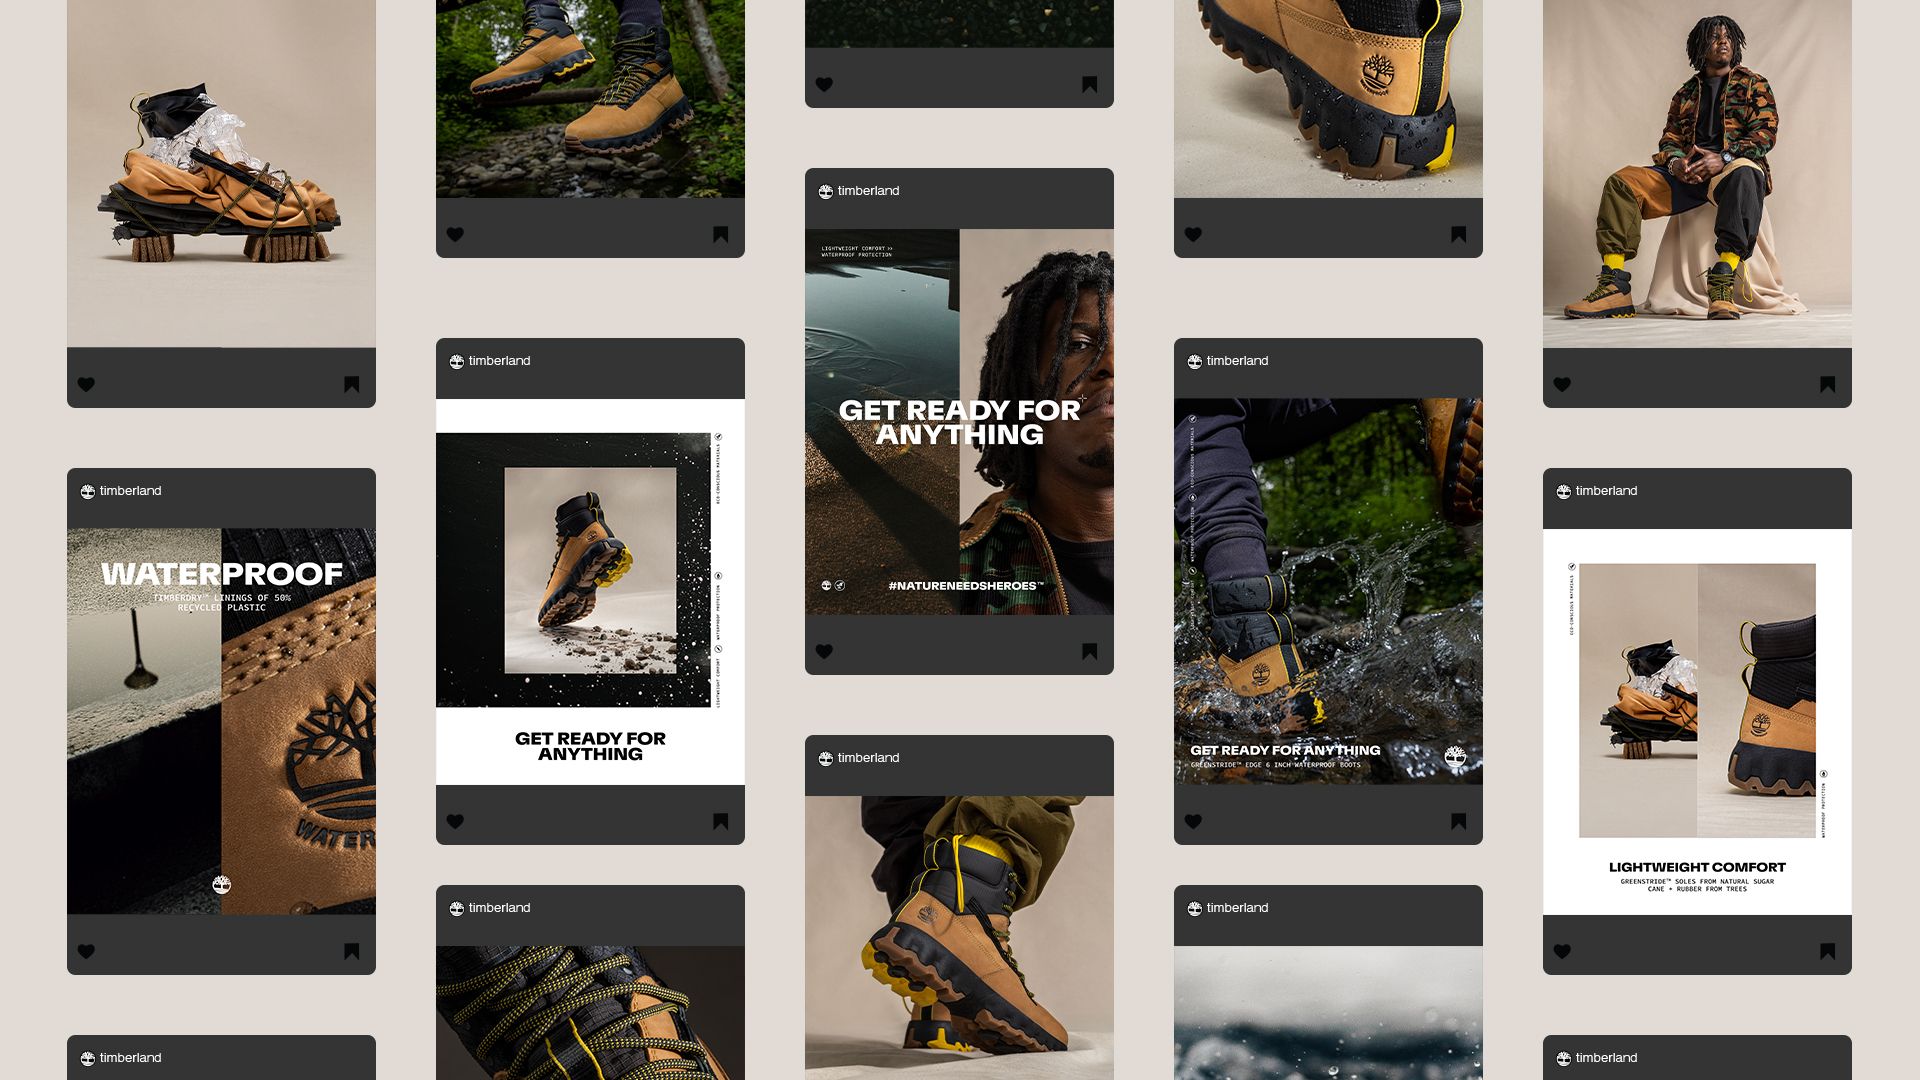 Collage of all @timberland social media posts featuring Timberland Greenstride boots and John Gray